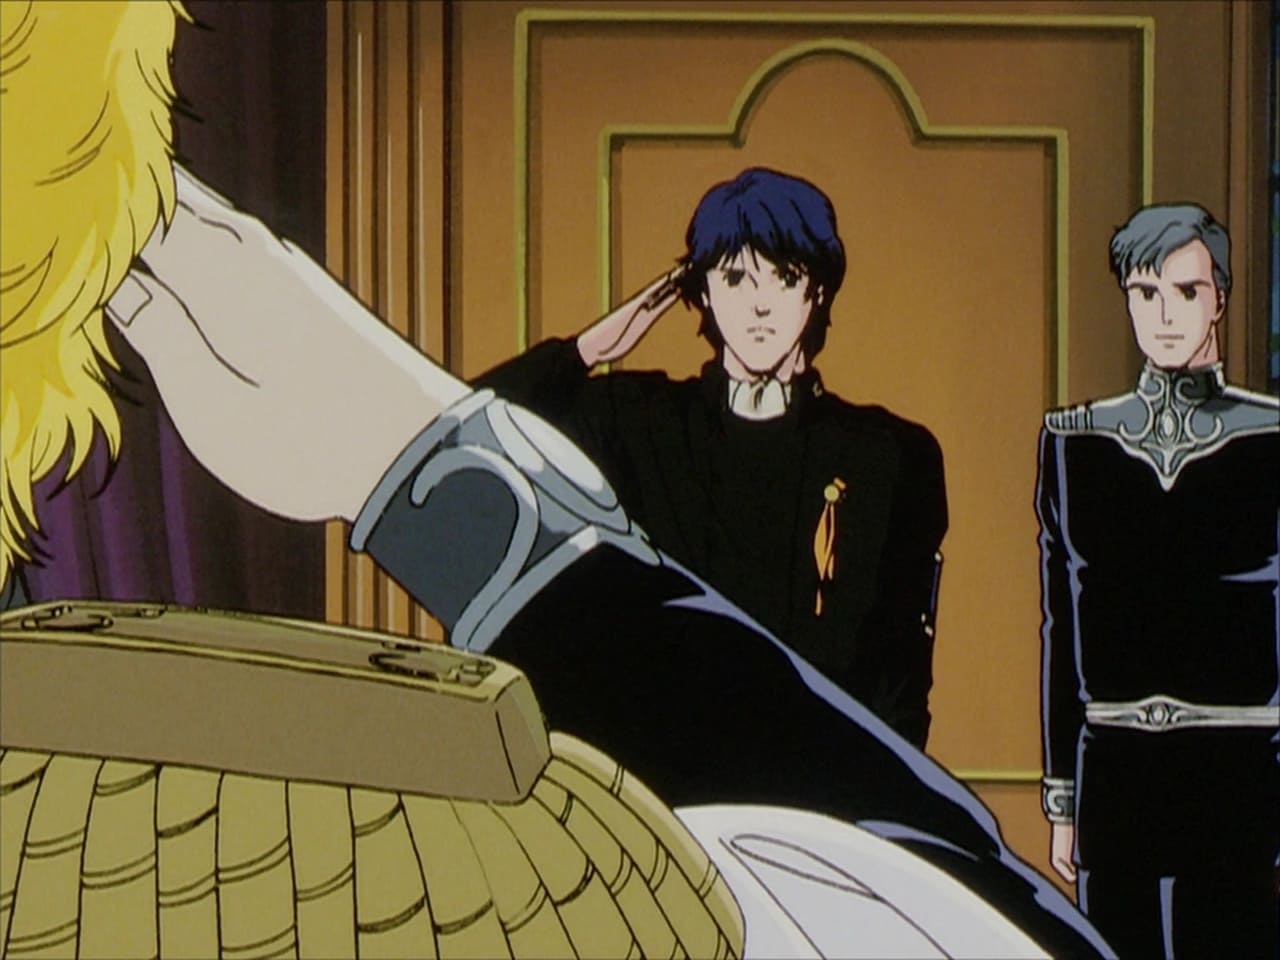 Legend of the Galactic Heroes - Season 2 Episode 28 : Long Live the Kaiser!